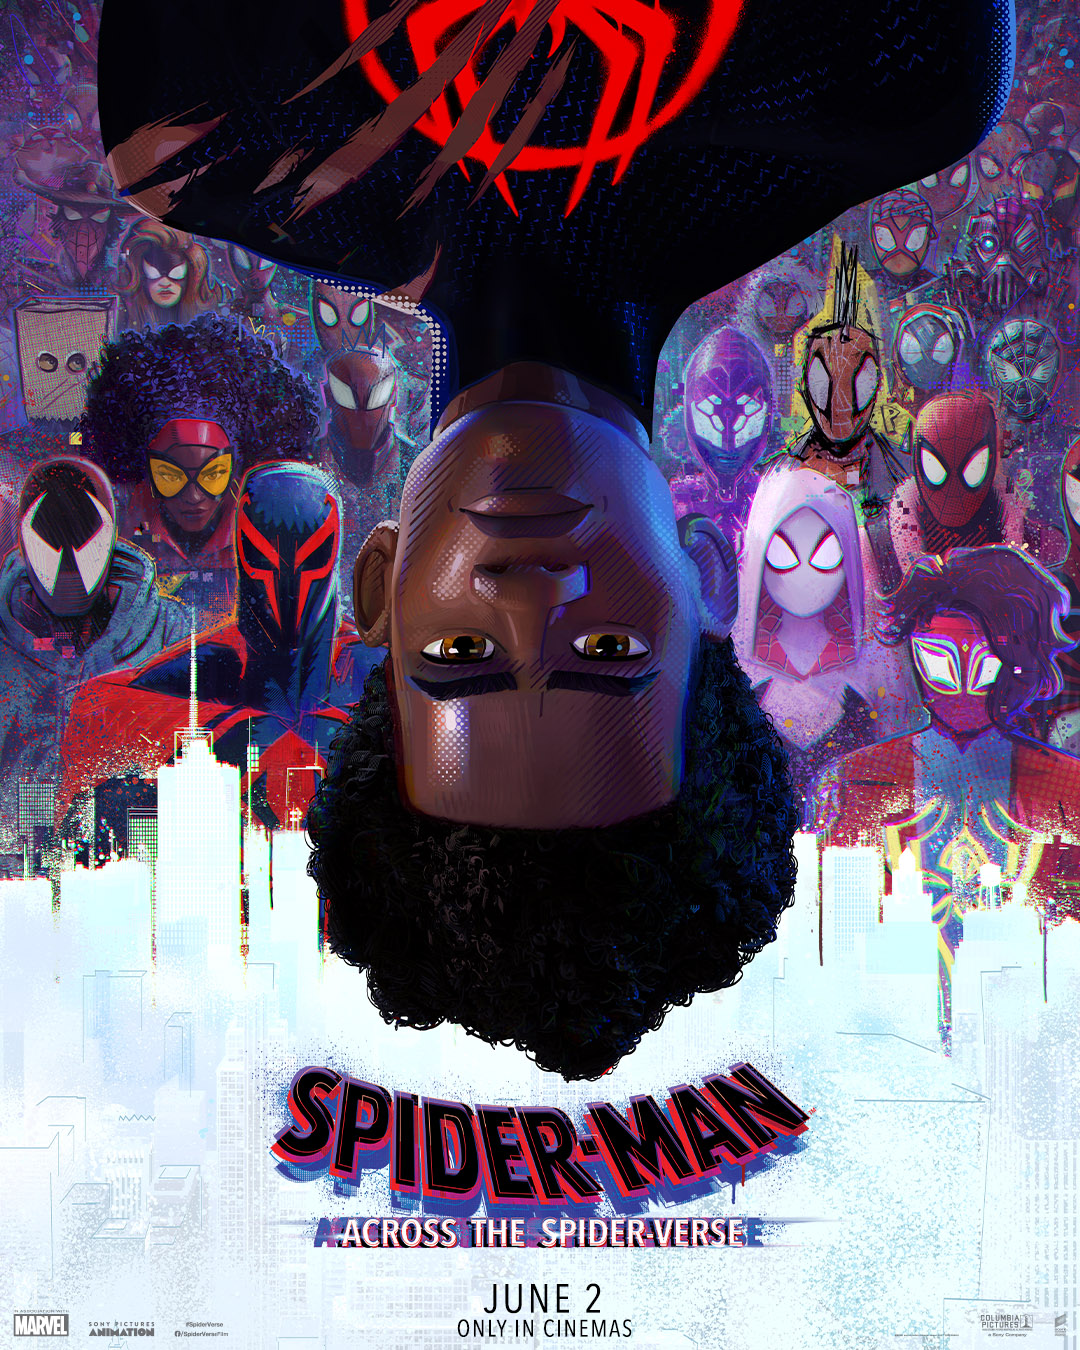 An official poster for Spider-Man: Across the Spider-Verse, which shows a bunch of Spider-People